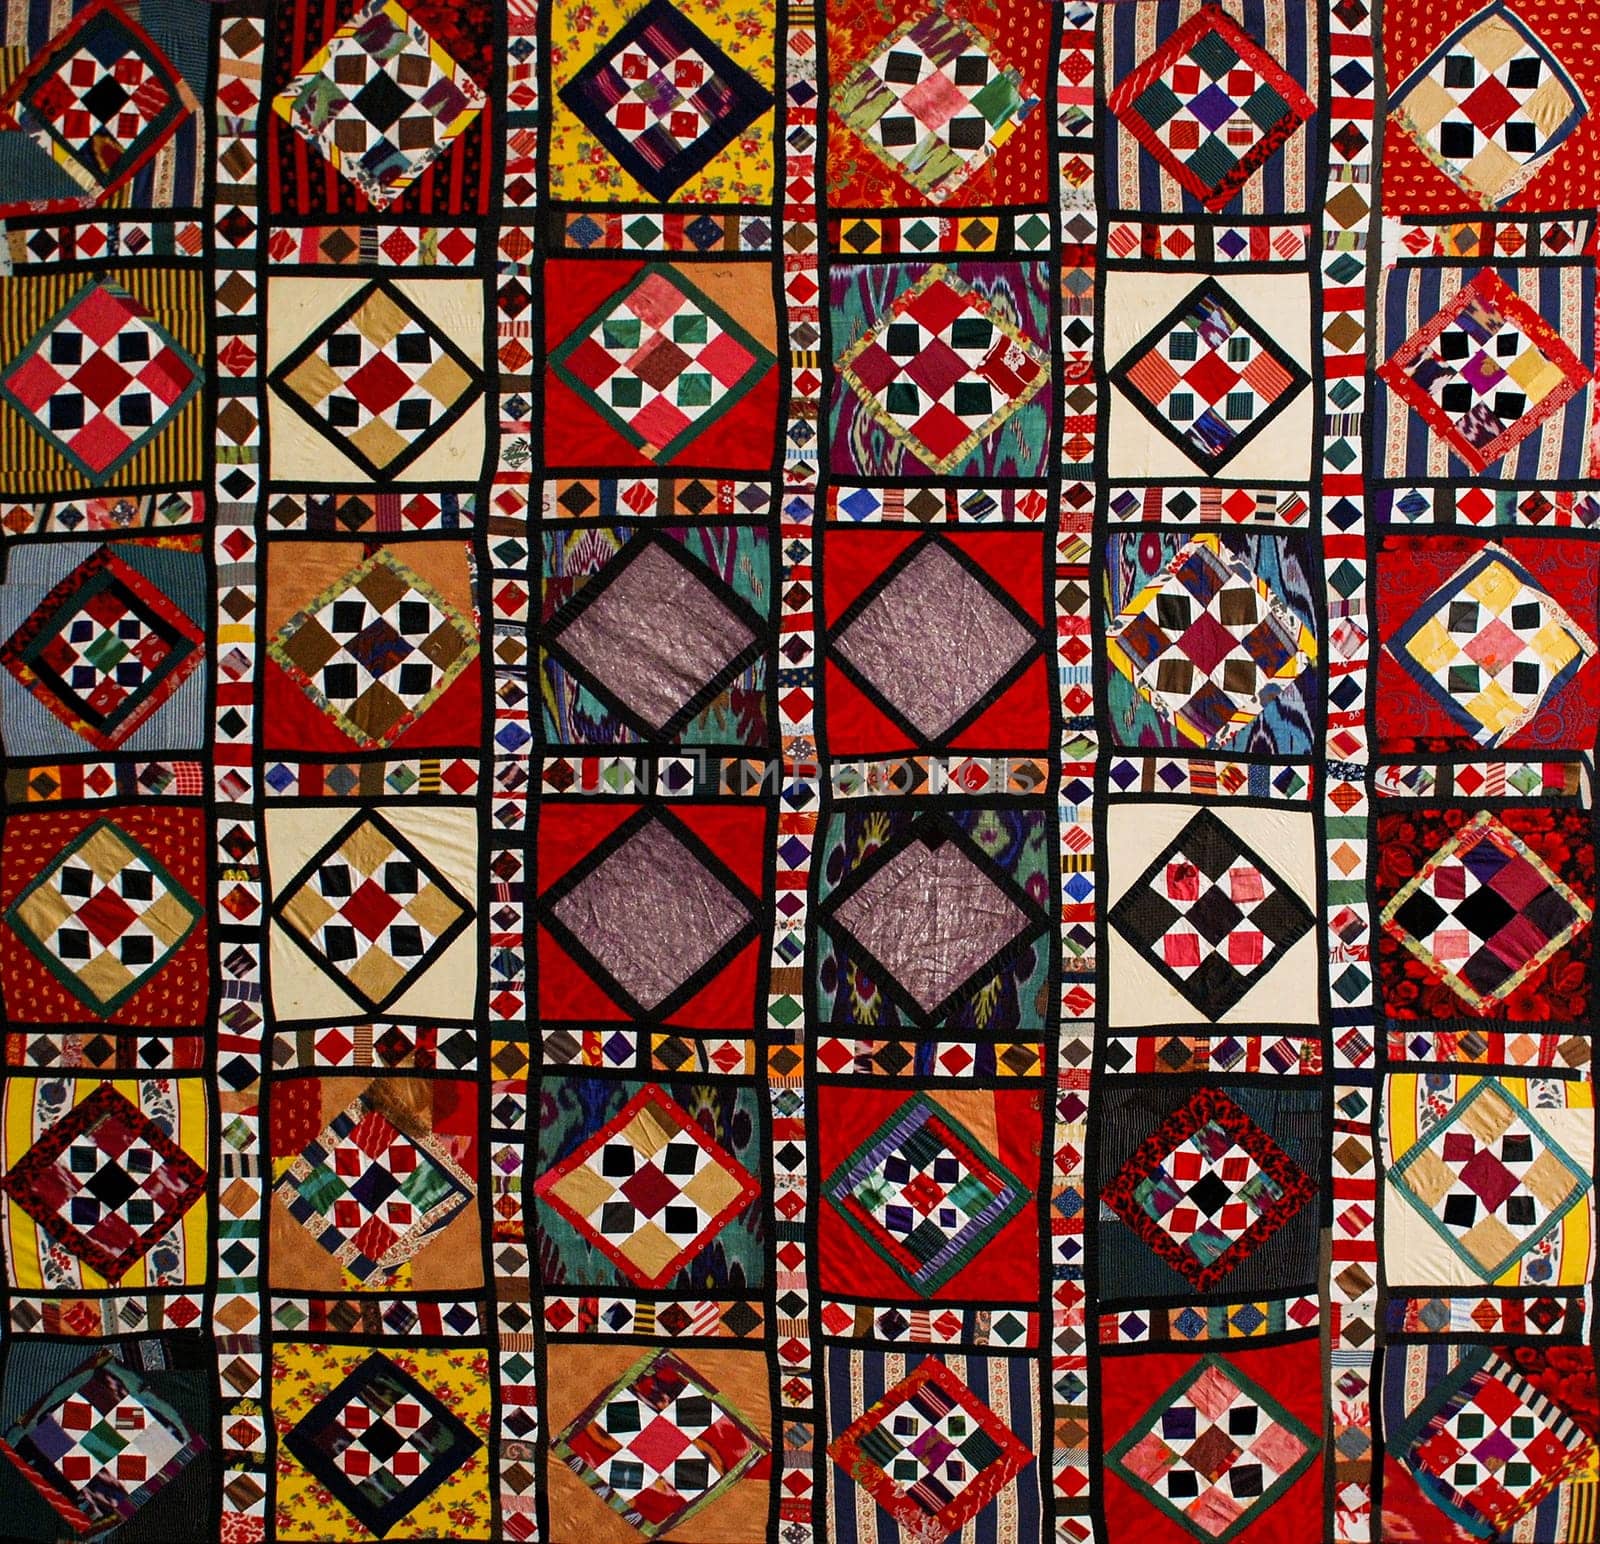 A closeup shot of national ornaments and patterns of Central Asia on fabric by A_Karim